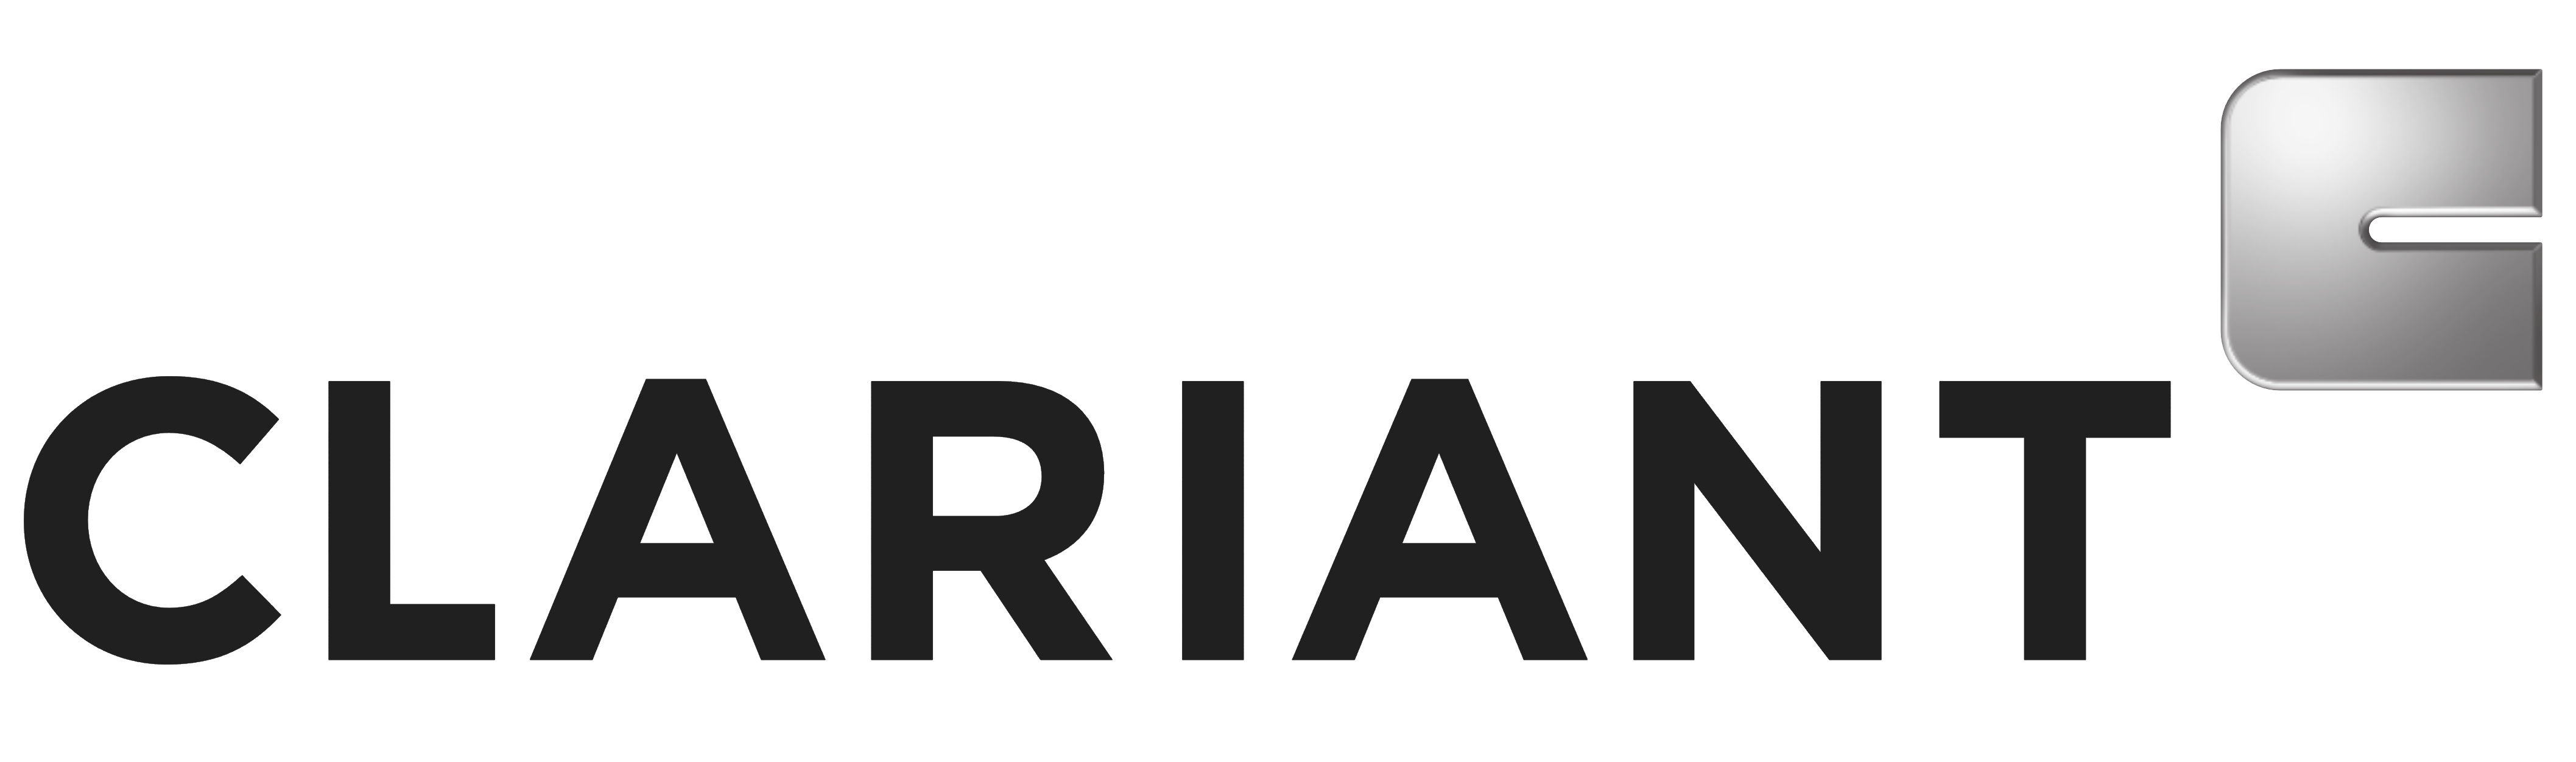 Clariant – Logos Download